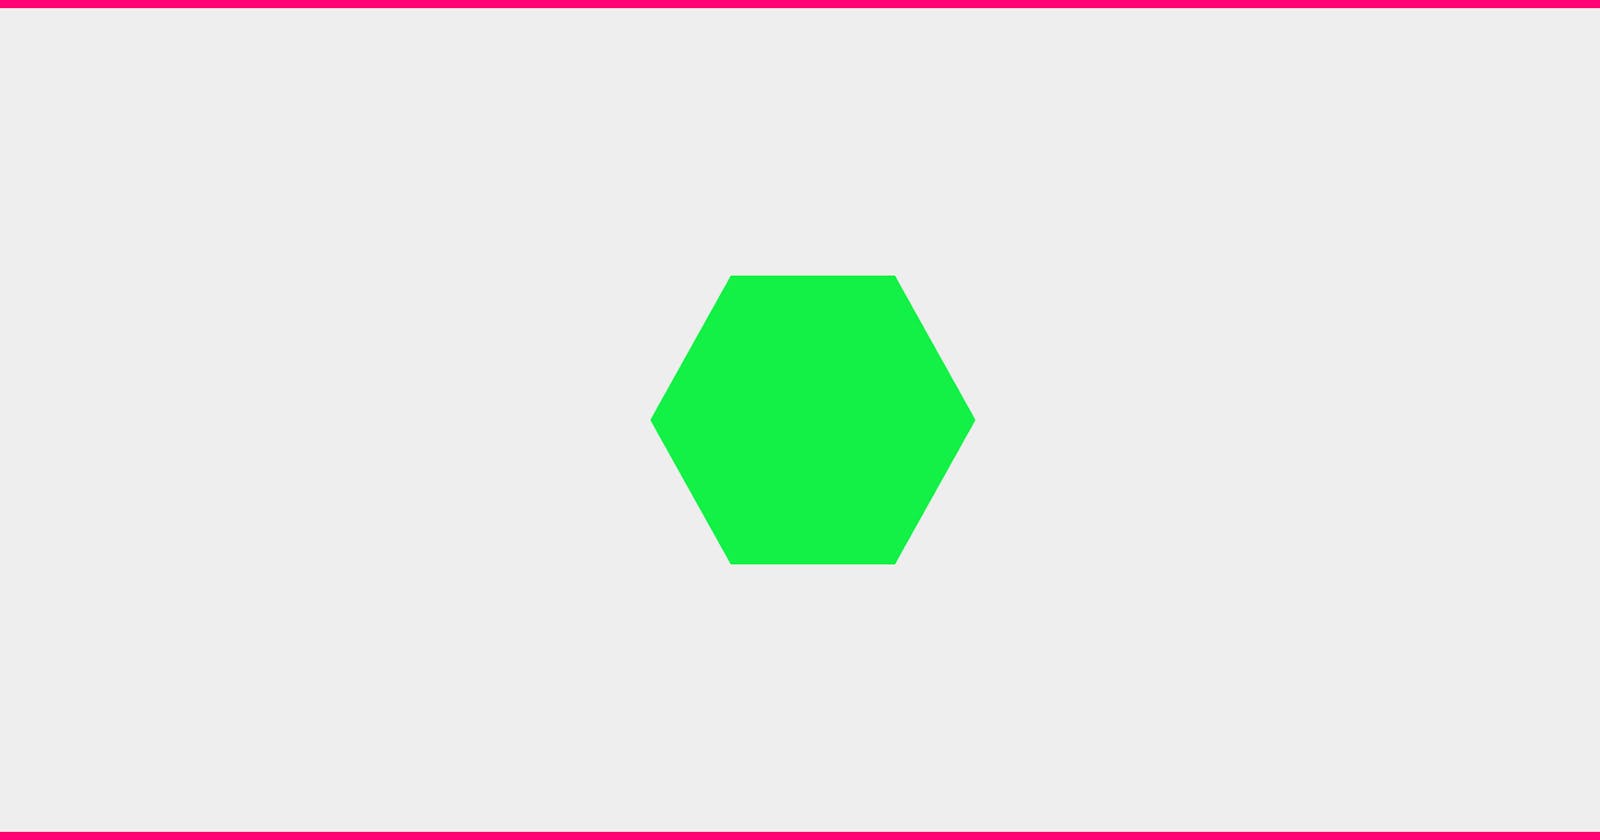 How To Make a Hexagon honeycomb With CSS